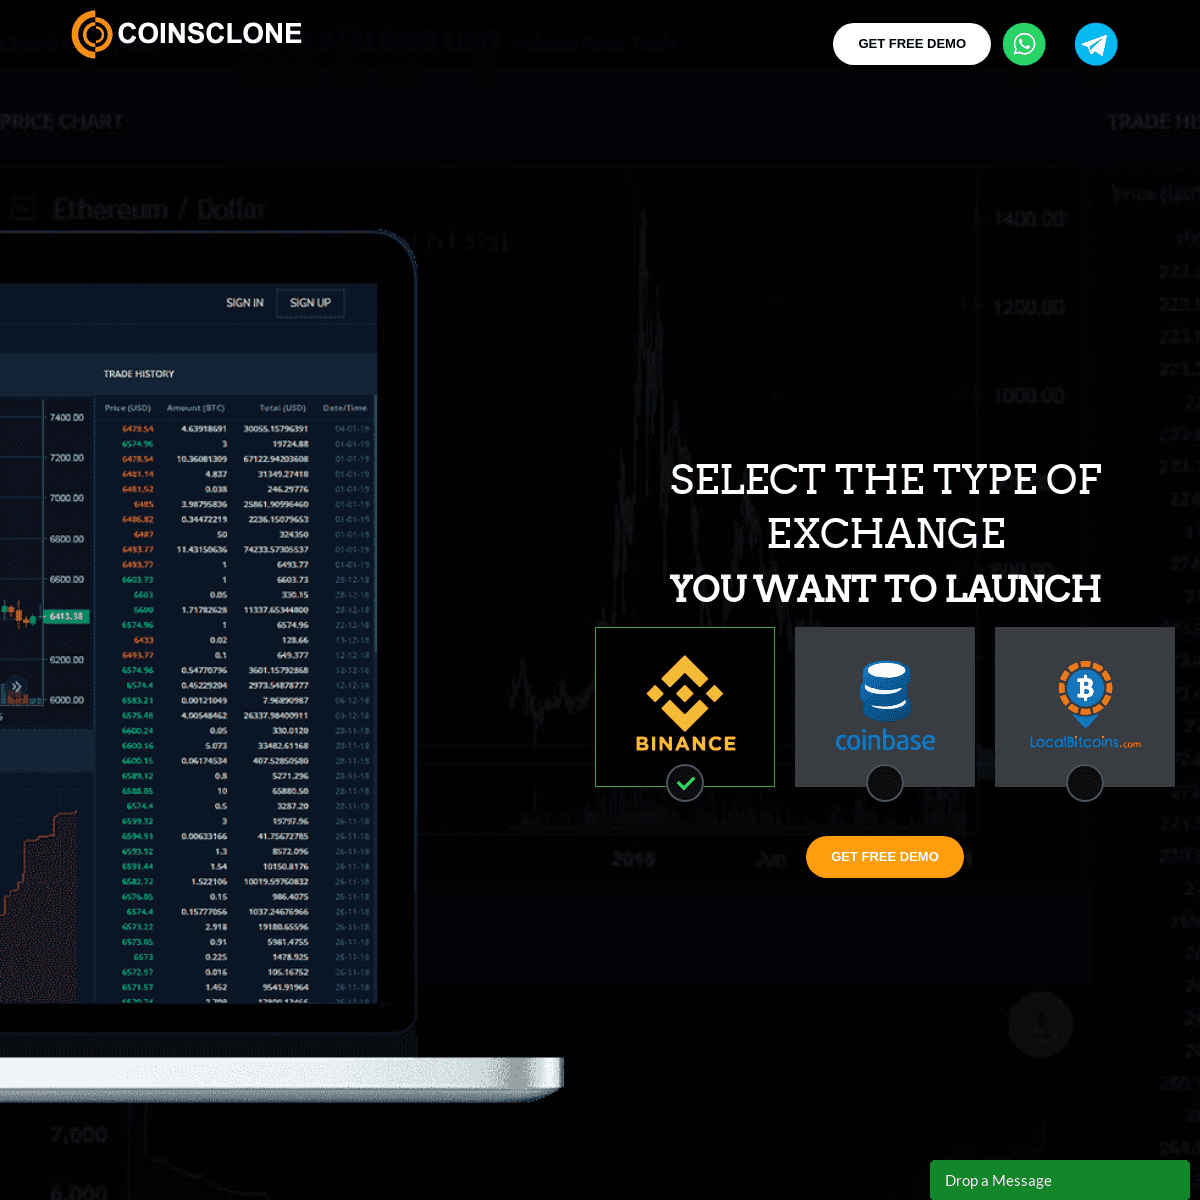 A complete backup of coinsclone.com